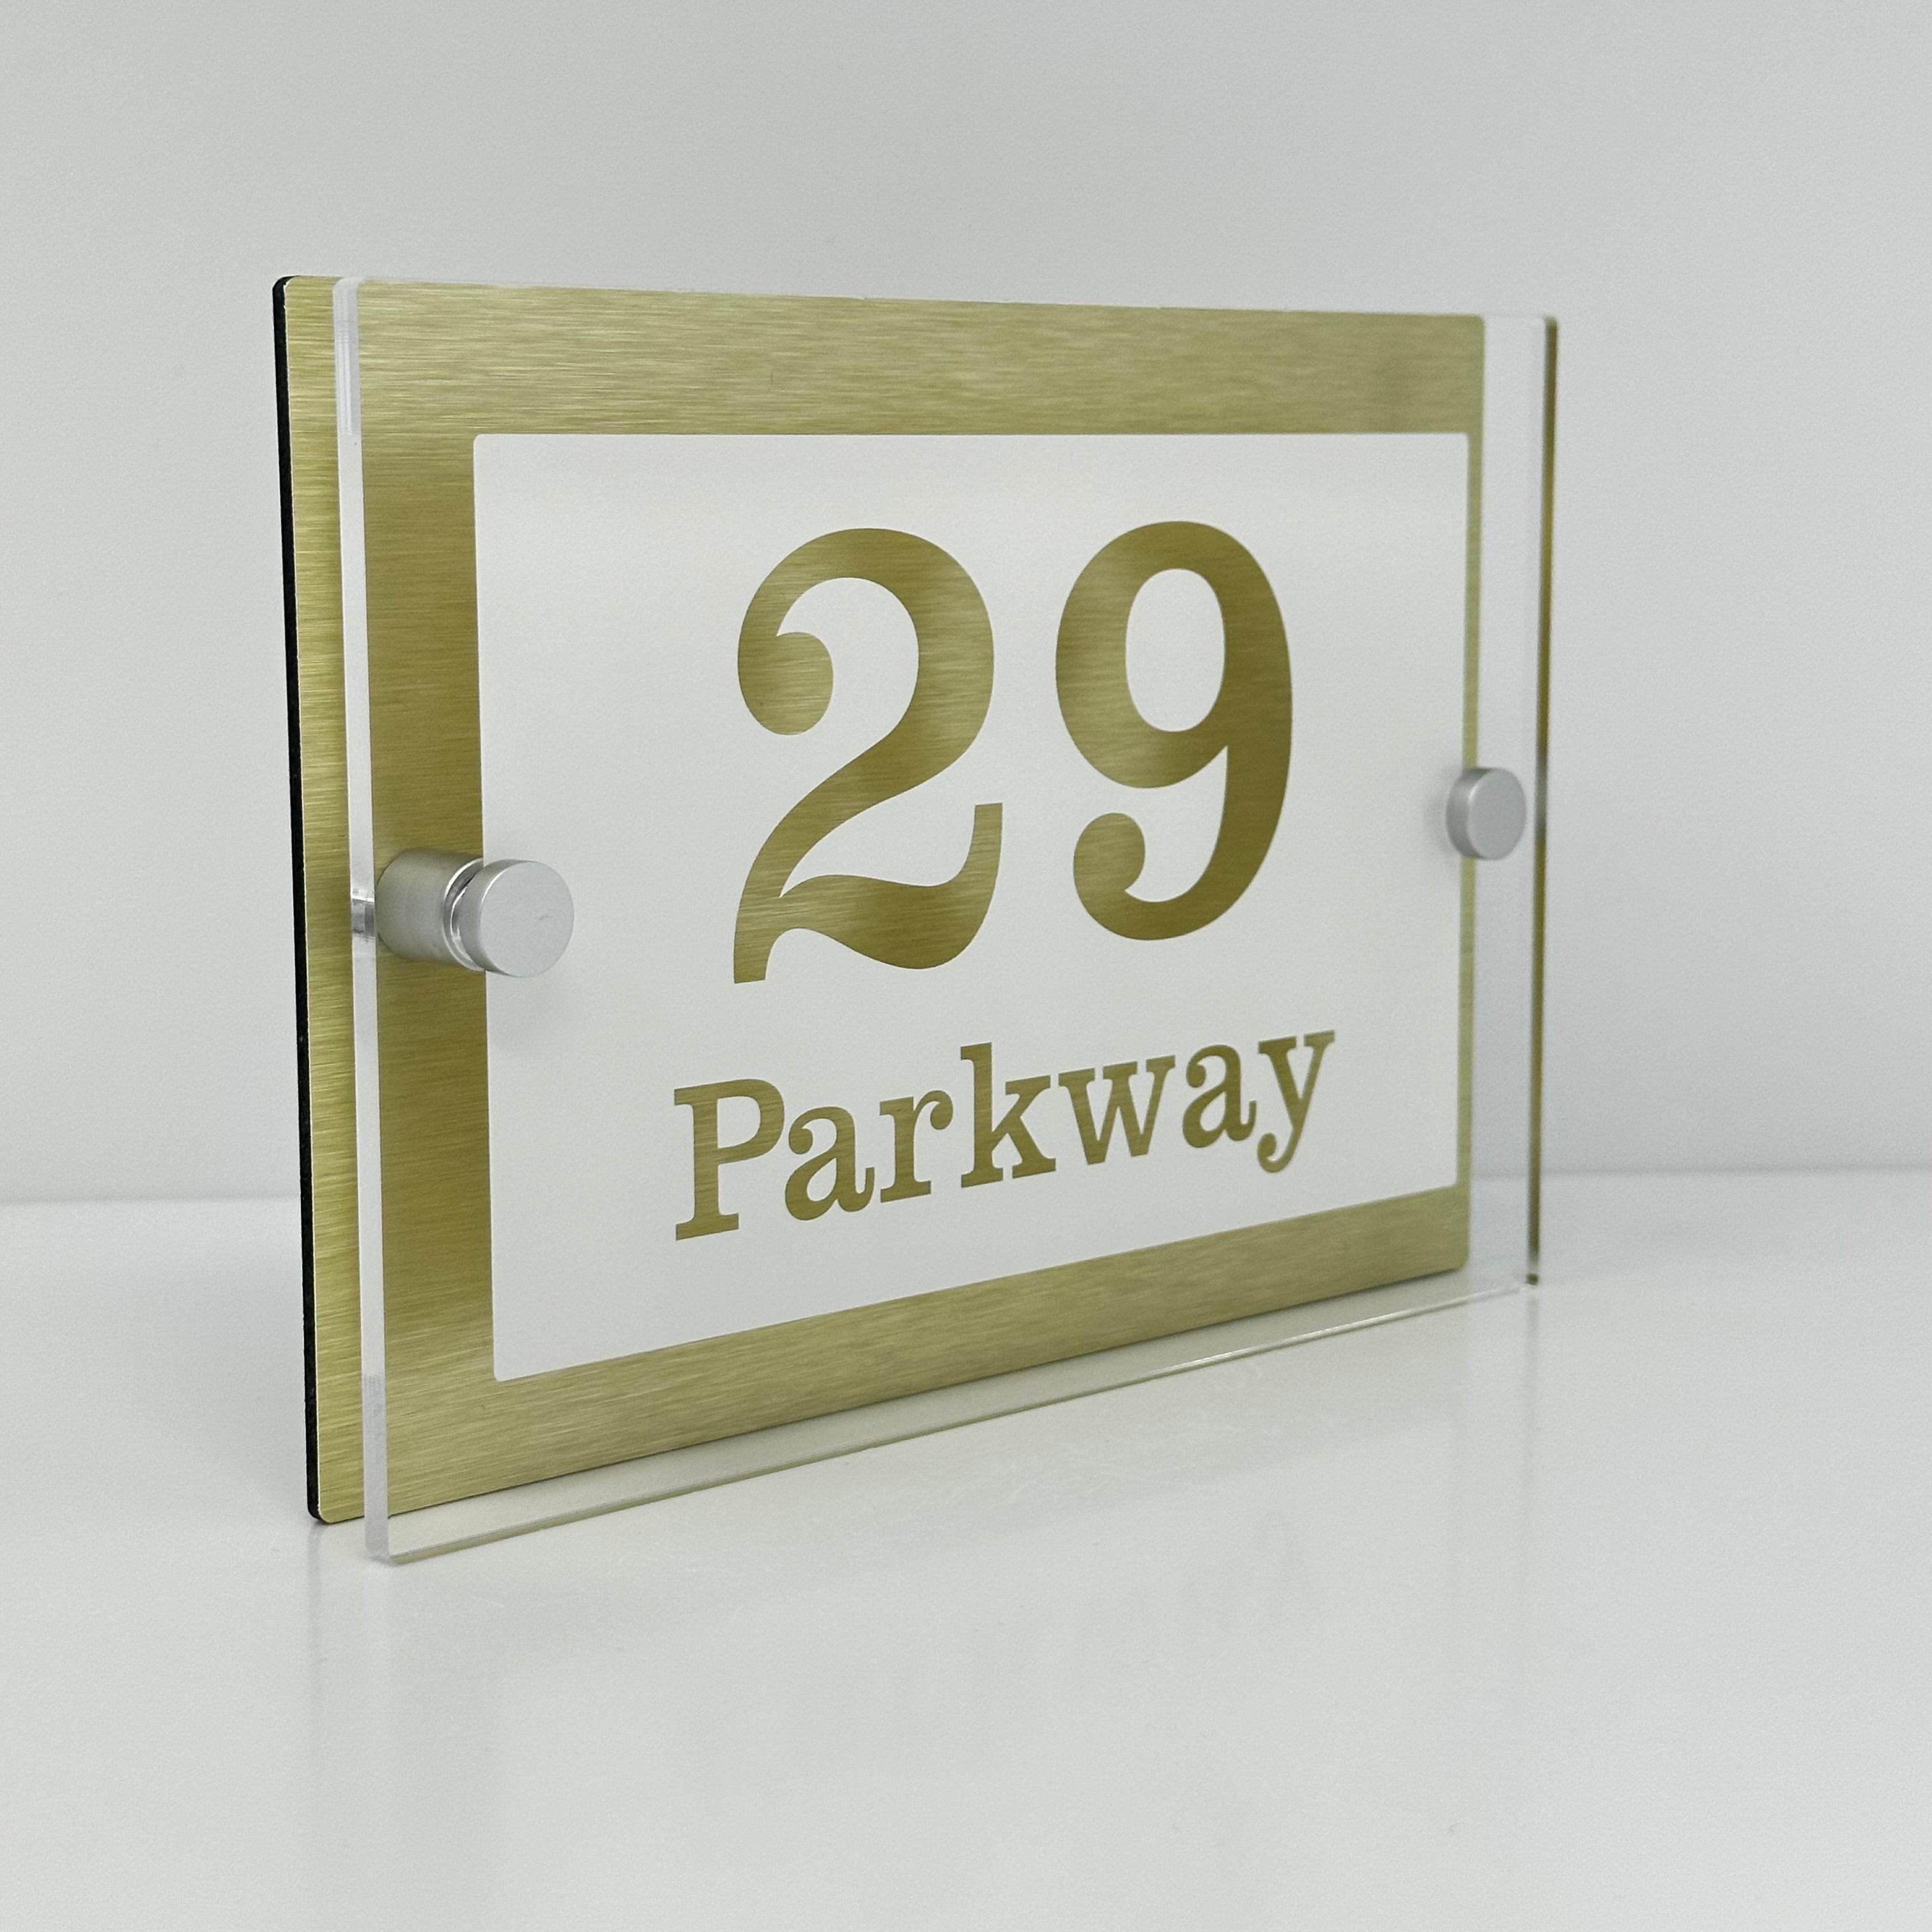 The Parkway Modern House Sign with Perspex Acrylic Front, Gold Rear Panel and Satin Silver Stand Off Fixings ( Size - 20cm x 14cm - WHITE BACKGROUND CLEAR TEXT )